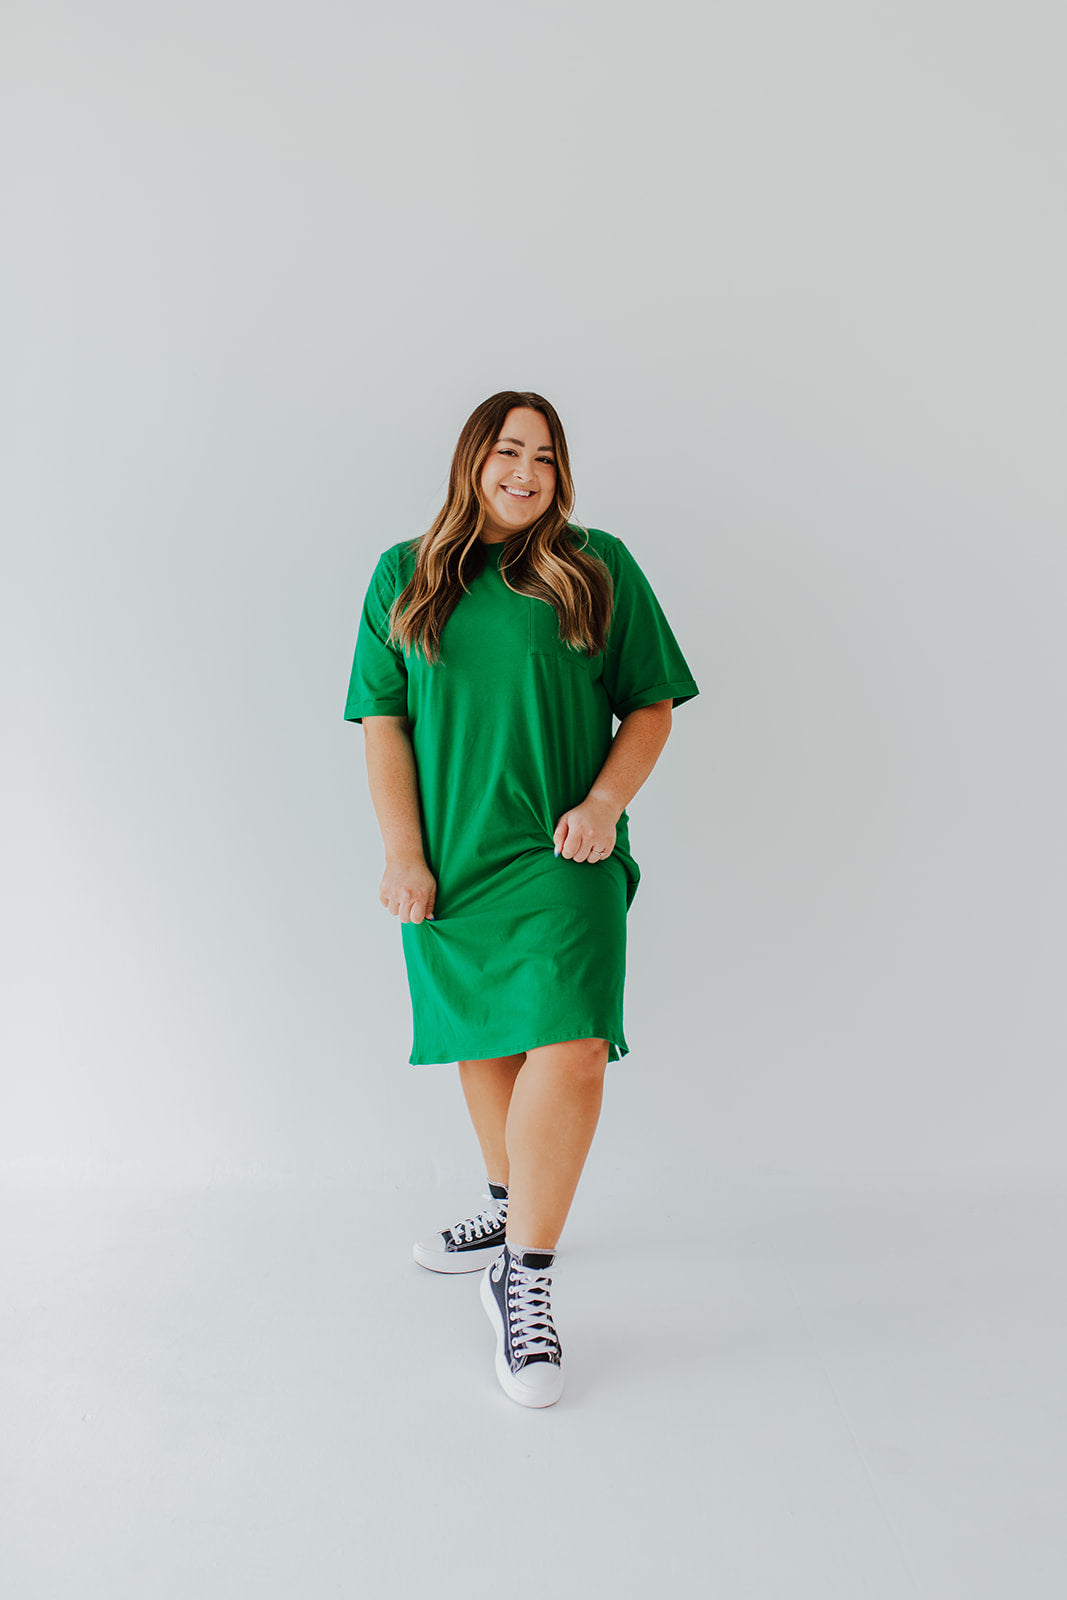 THE EASY DOES IT POCKET T-SHIRT DRESS BY PINK DESERT IN KELLY GREEN – Pink  Desert